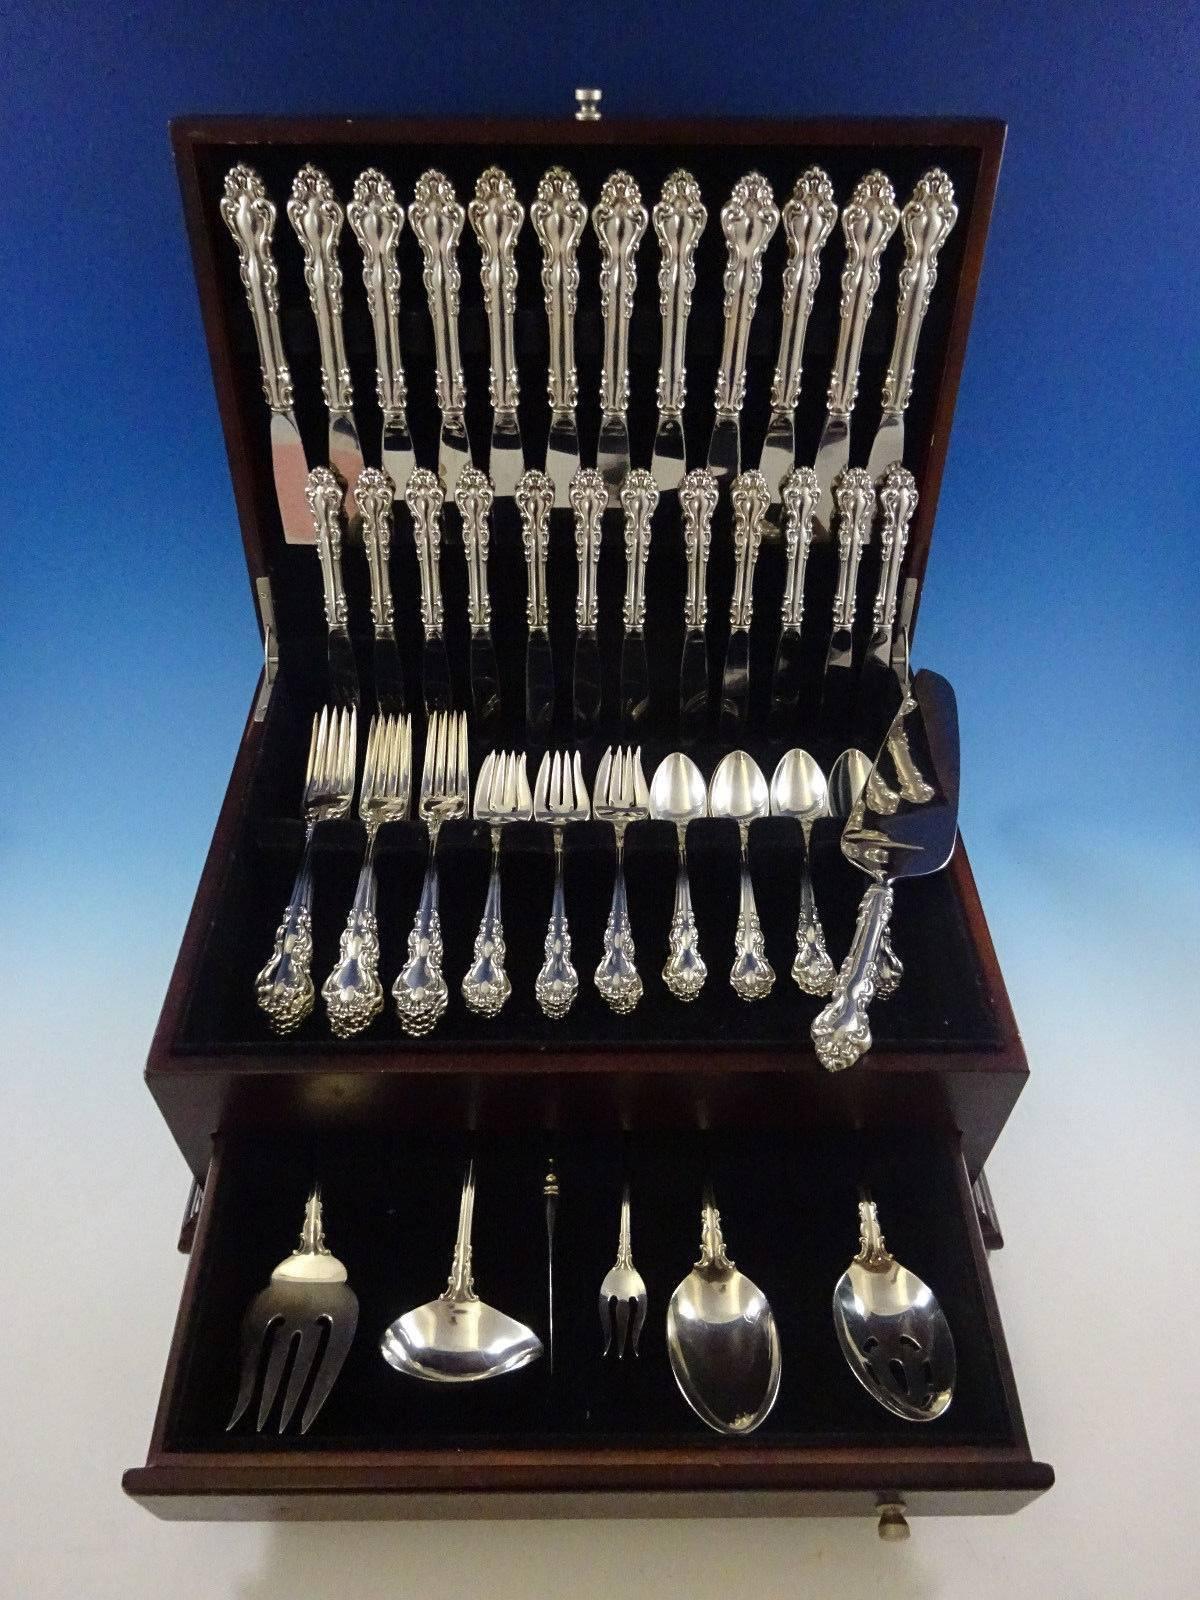 Spanish Baroque by Reed & Barton sterling silver Dinner Size Flatware set, 67 pieces. Large and heavy! This set includes: 

12 Dinner Size Knives, 9 5/8